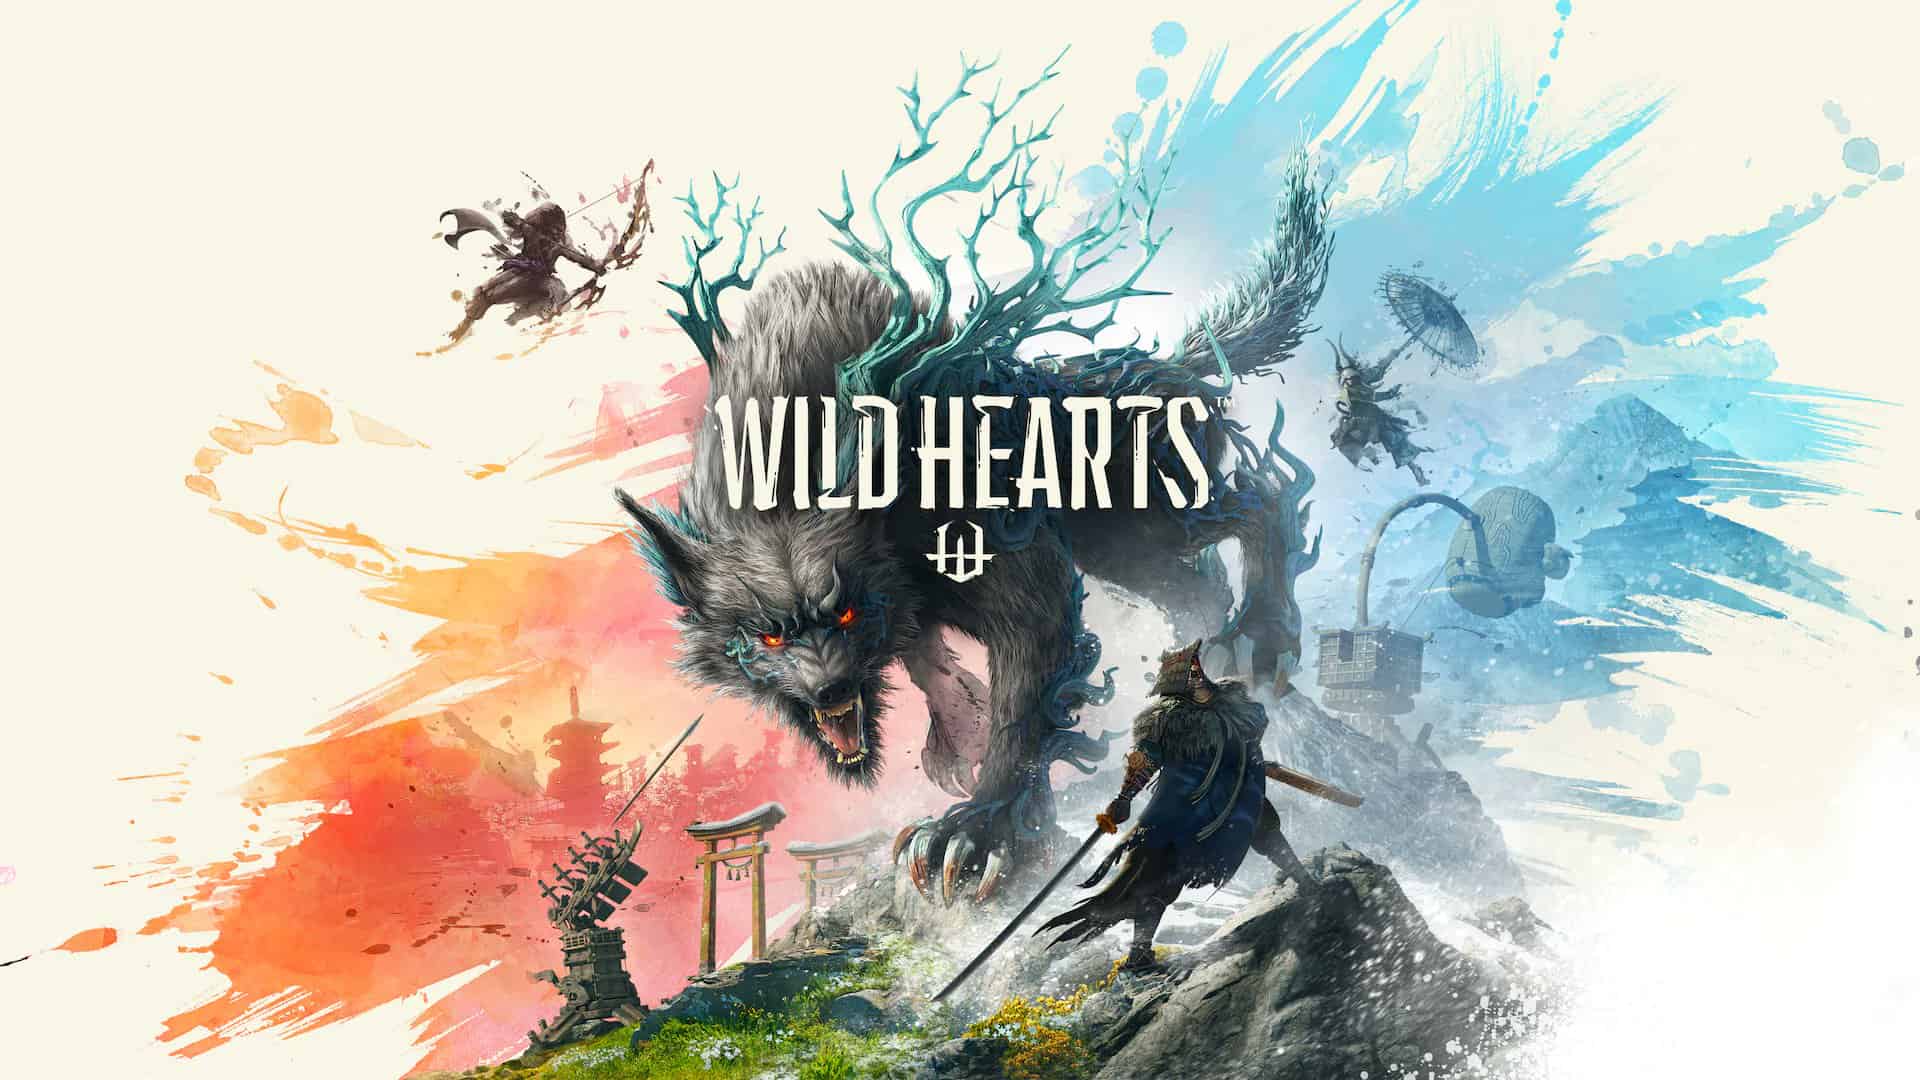 Wild Hearts Update 1.011 for March 27 Adds Improvements and Fixes